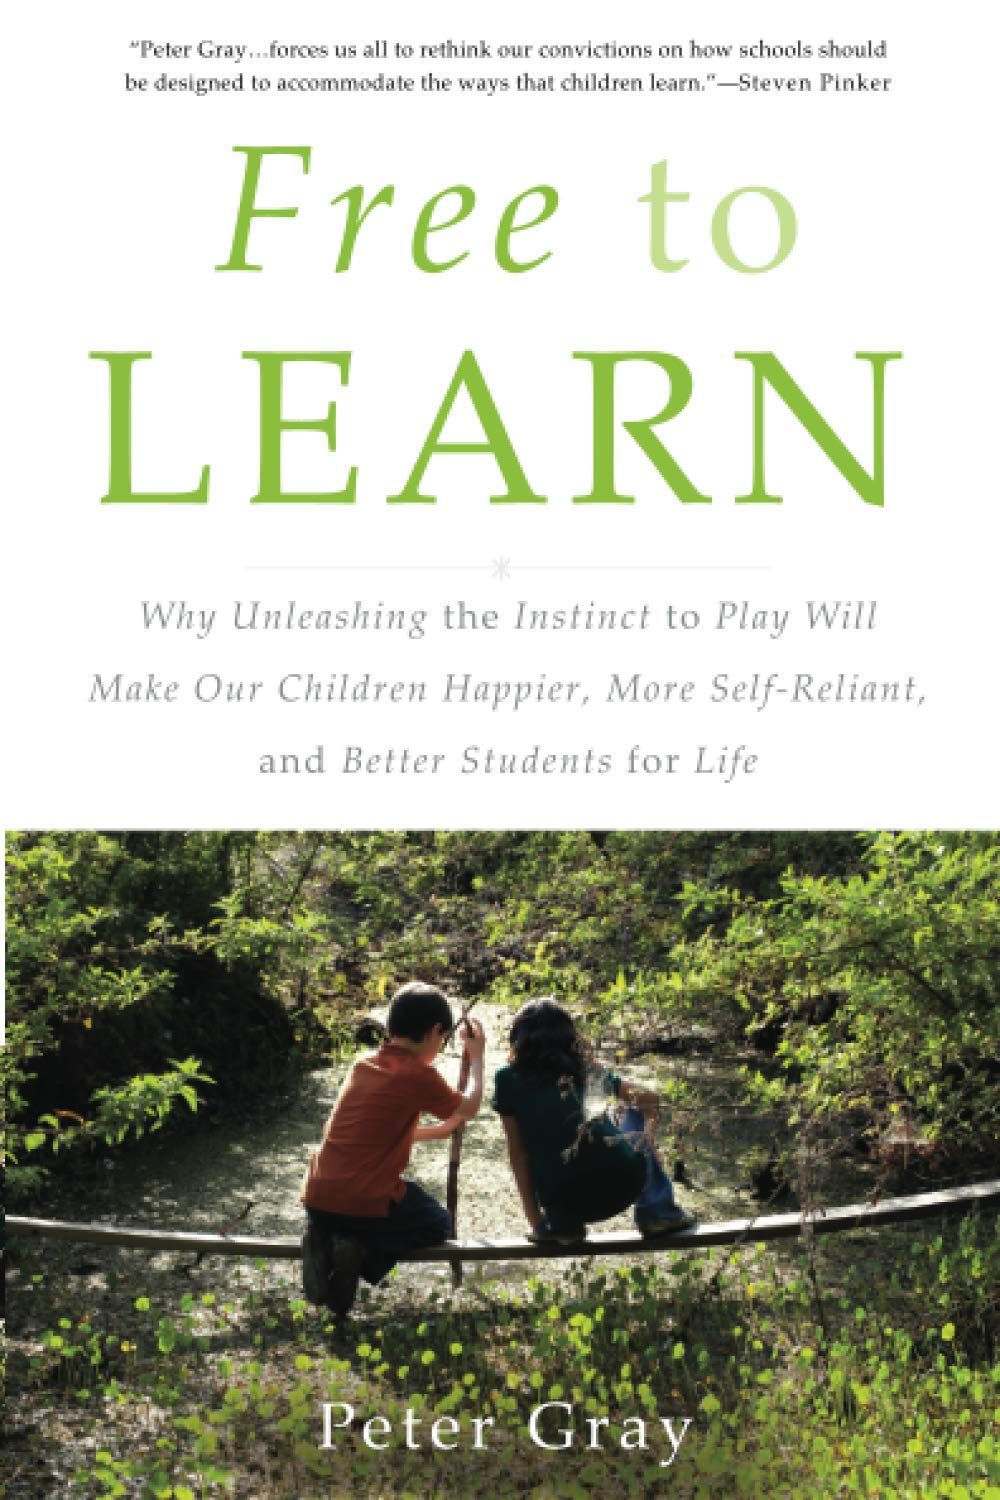 Free to Learn: Why Unleashing the Instinct to Play Will Make Our Children Happier, More Self-Reliant, and Better Students for Life (1ST ed.) - SureShot Books Publishing LLC